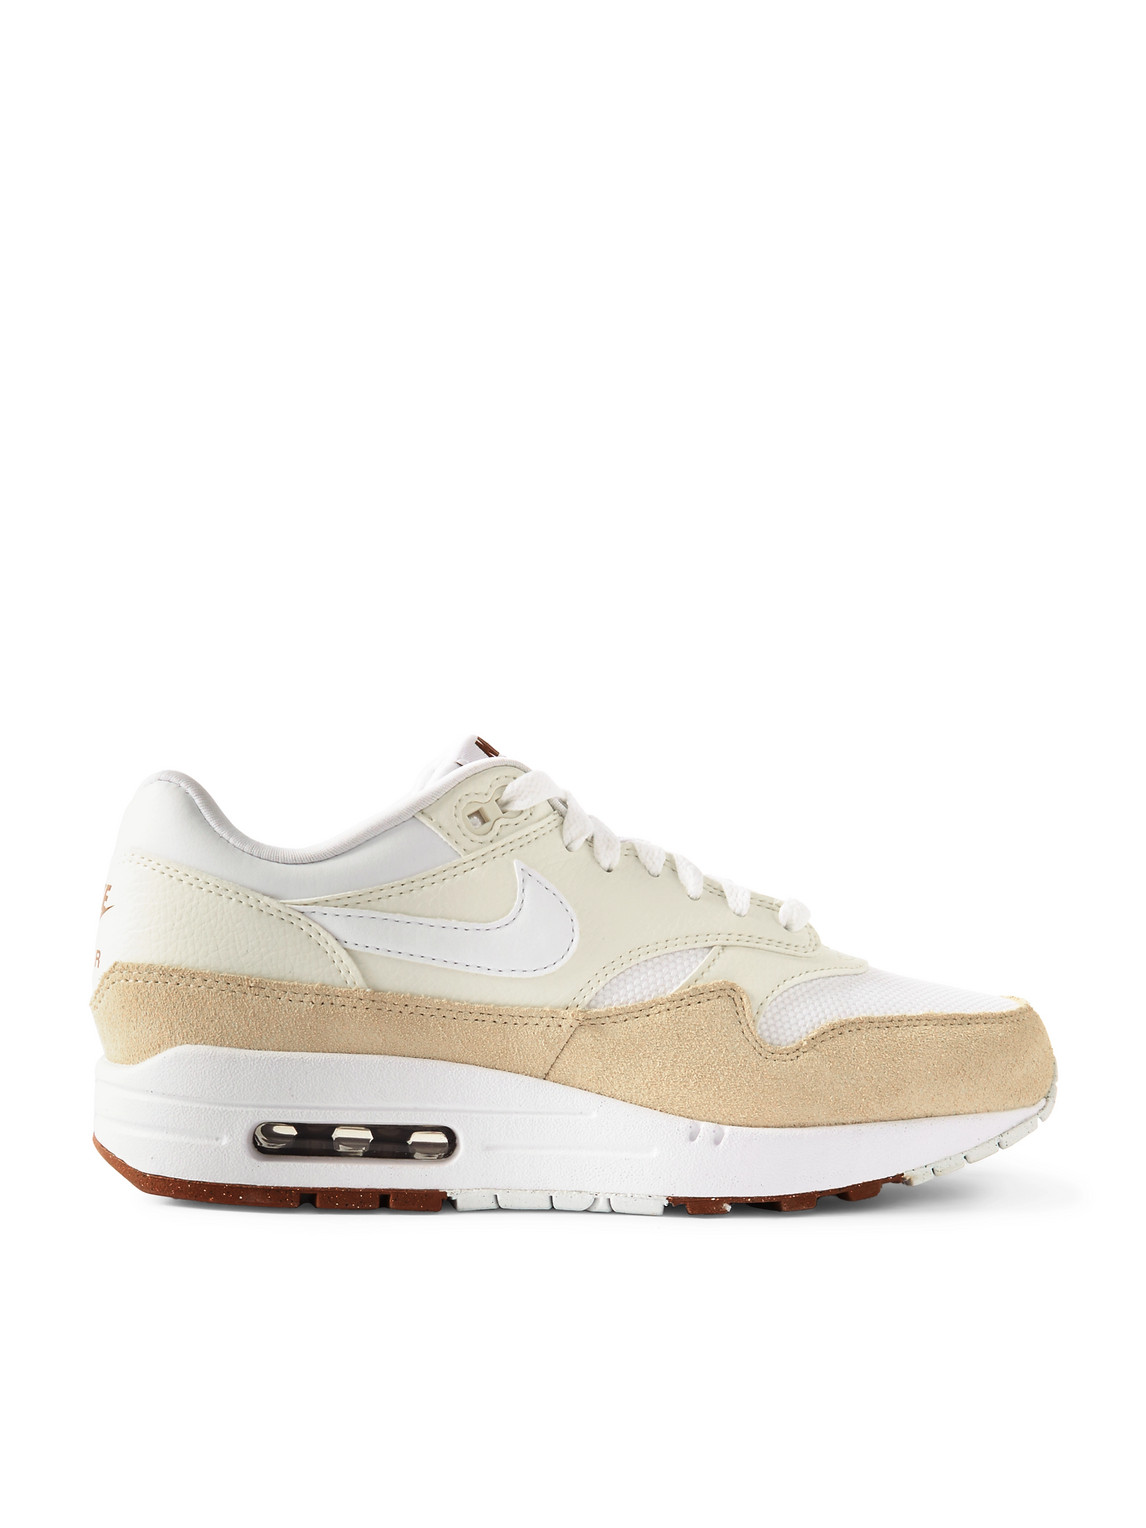 Nike Air Max 1 Sc Suede, Mesh And Leather Trainers In Neutrals